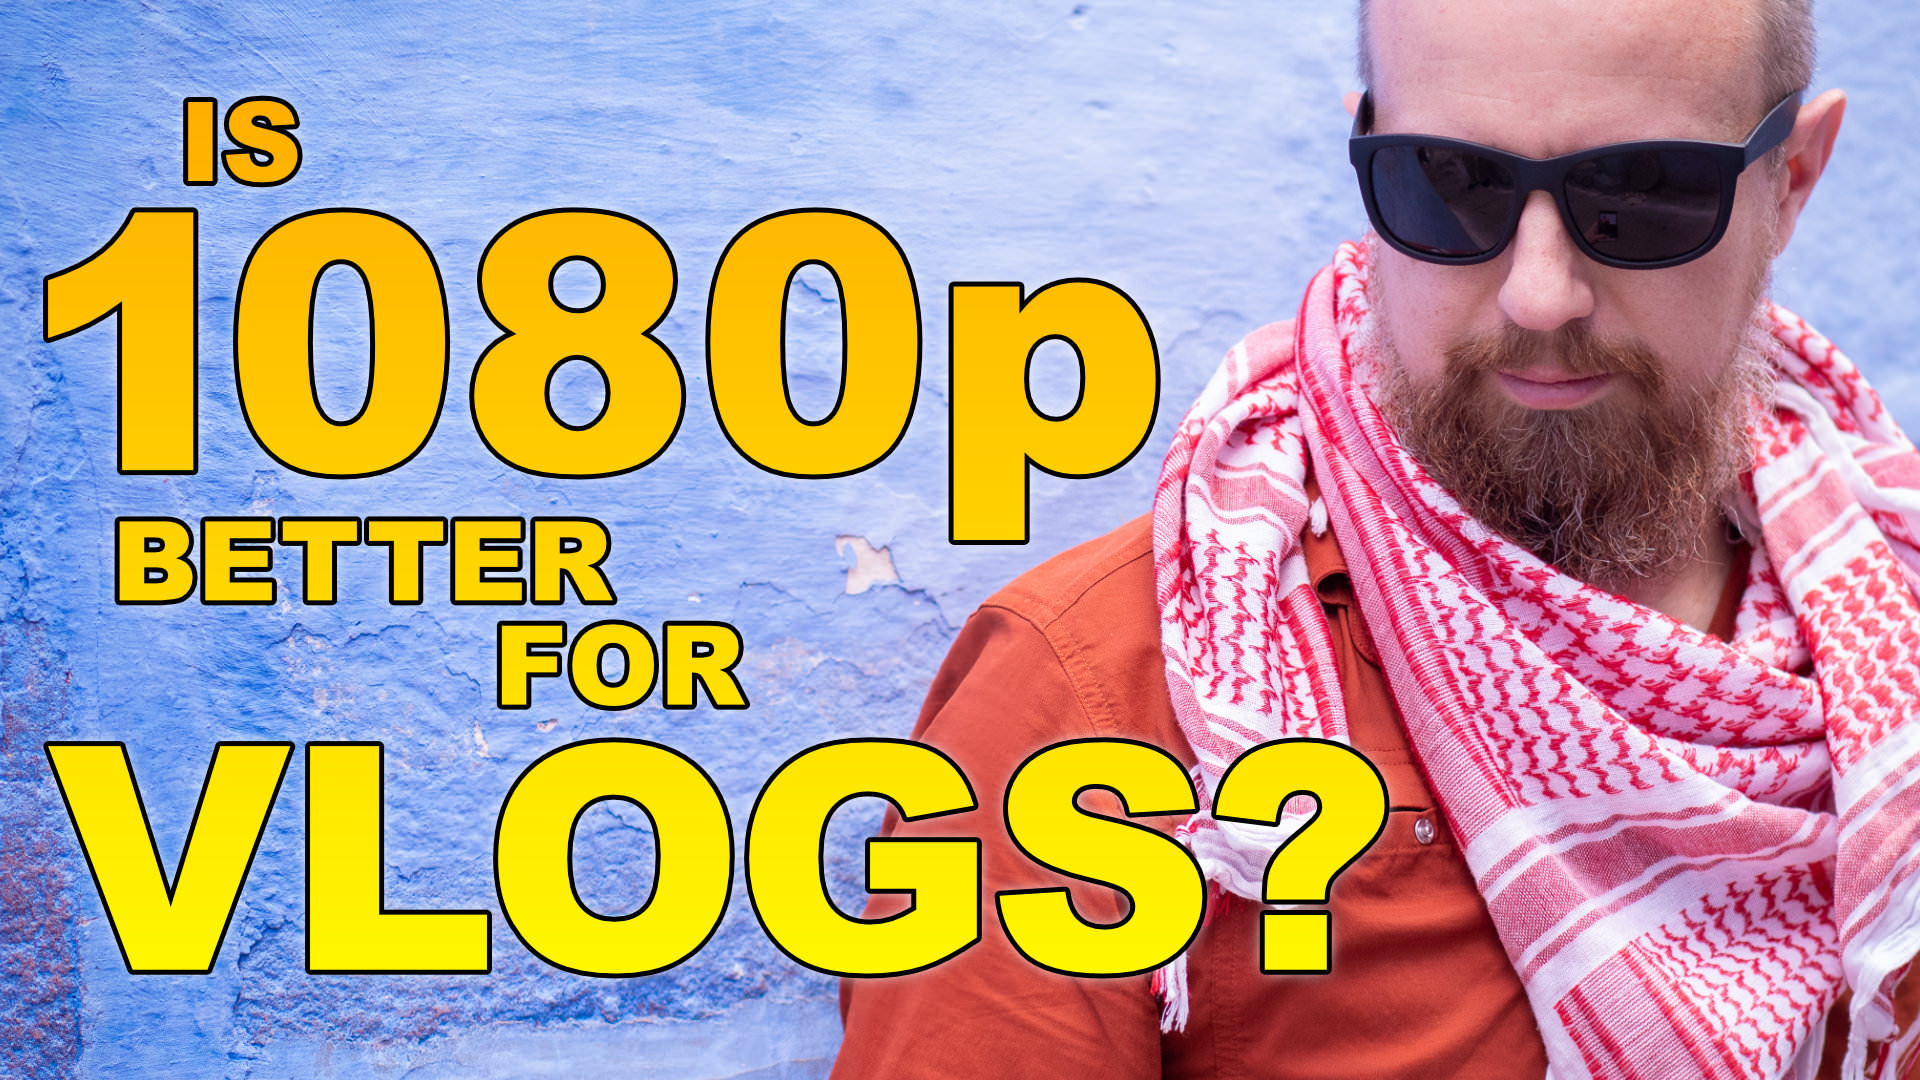 Is 1080p Better for Vloggers?